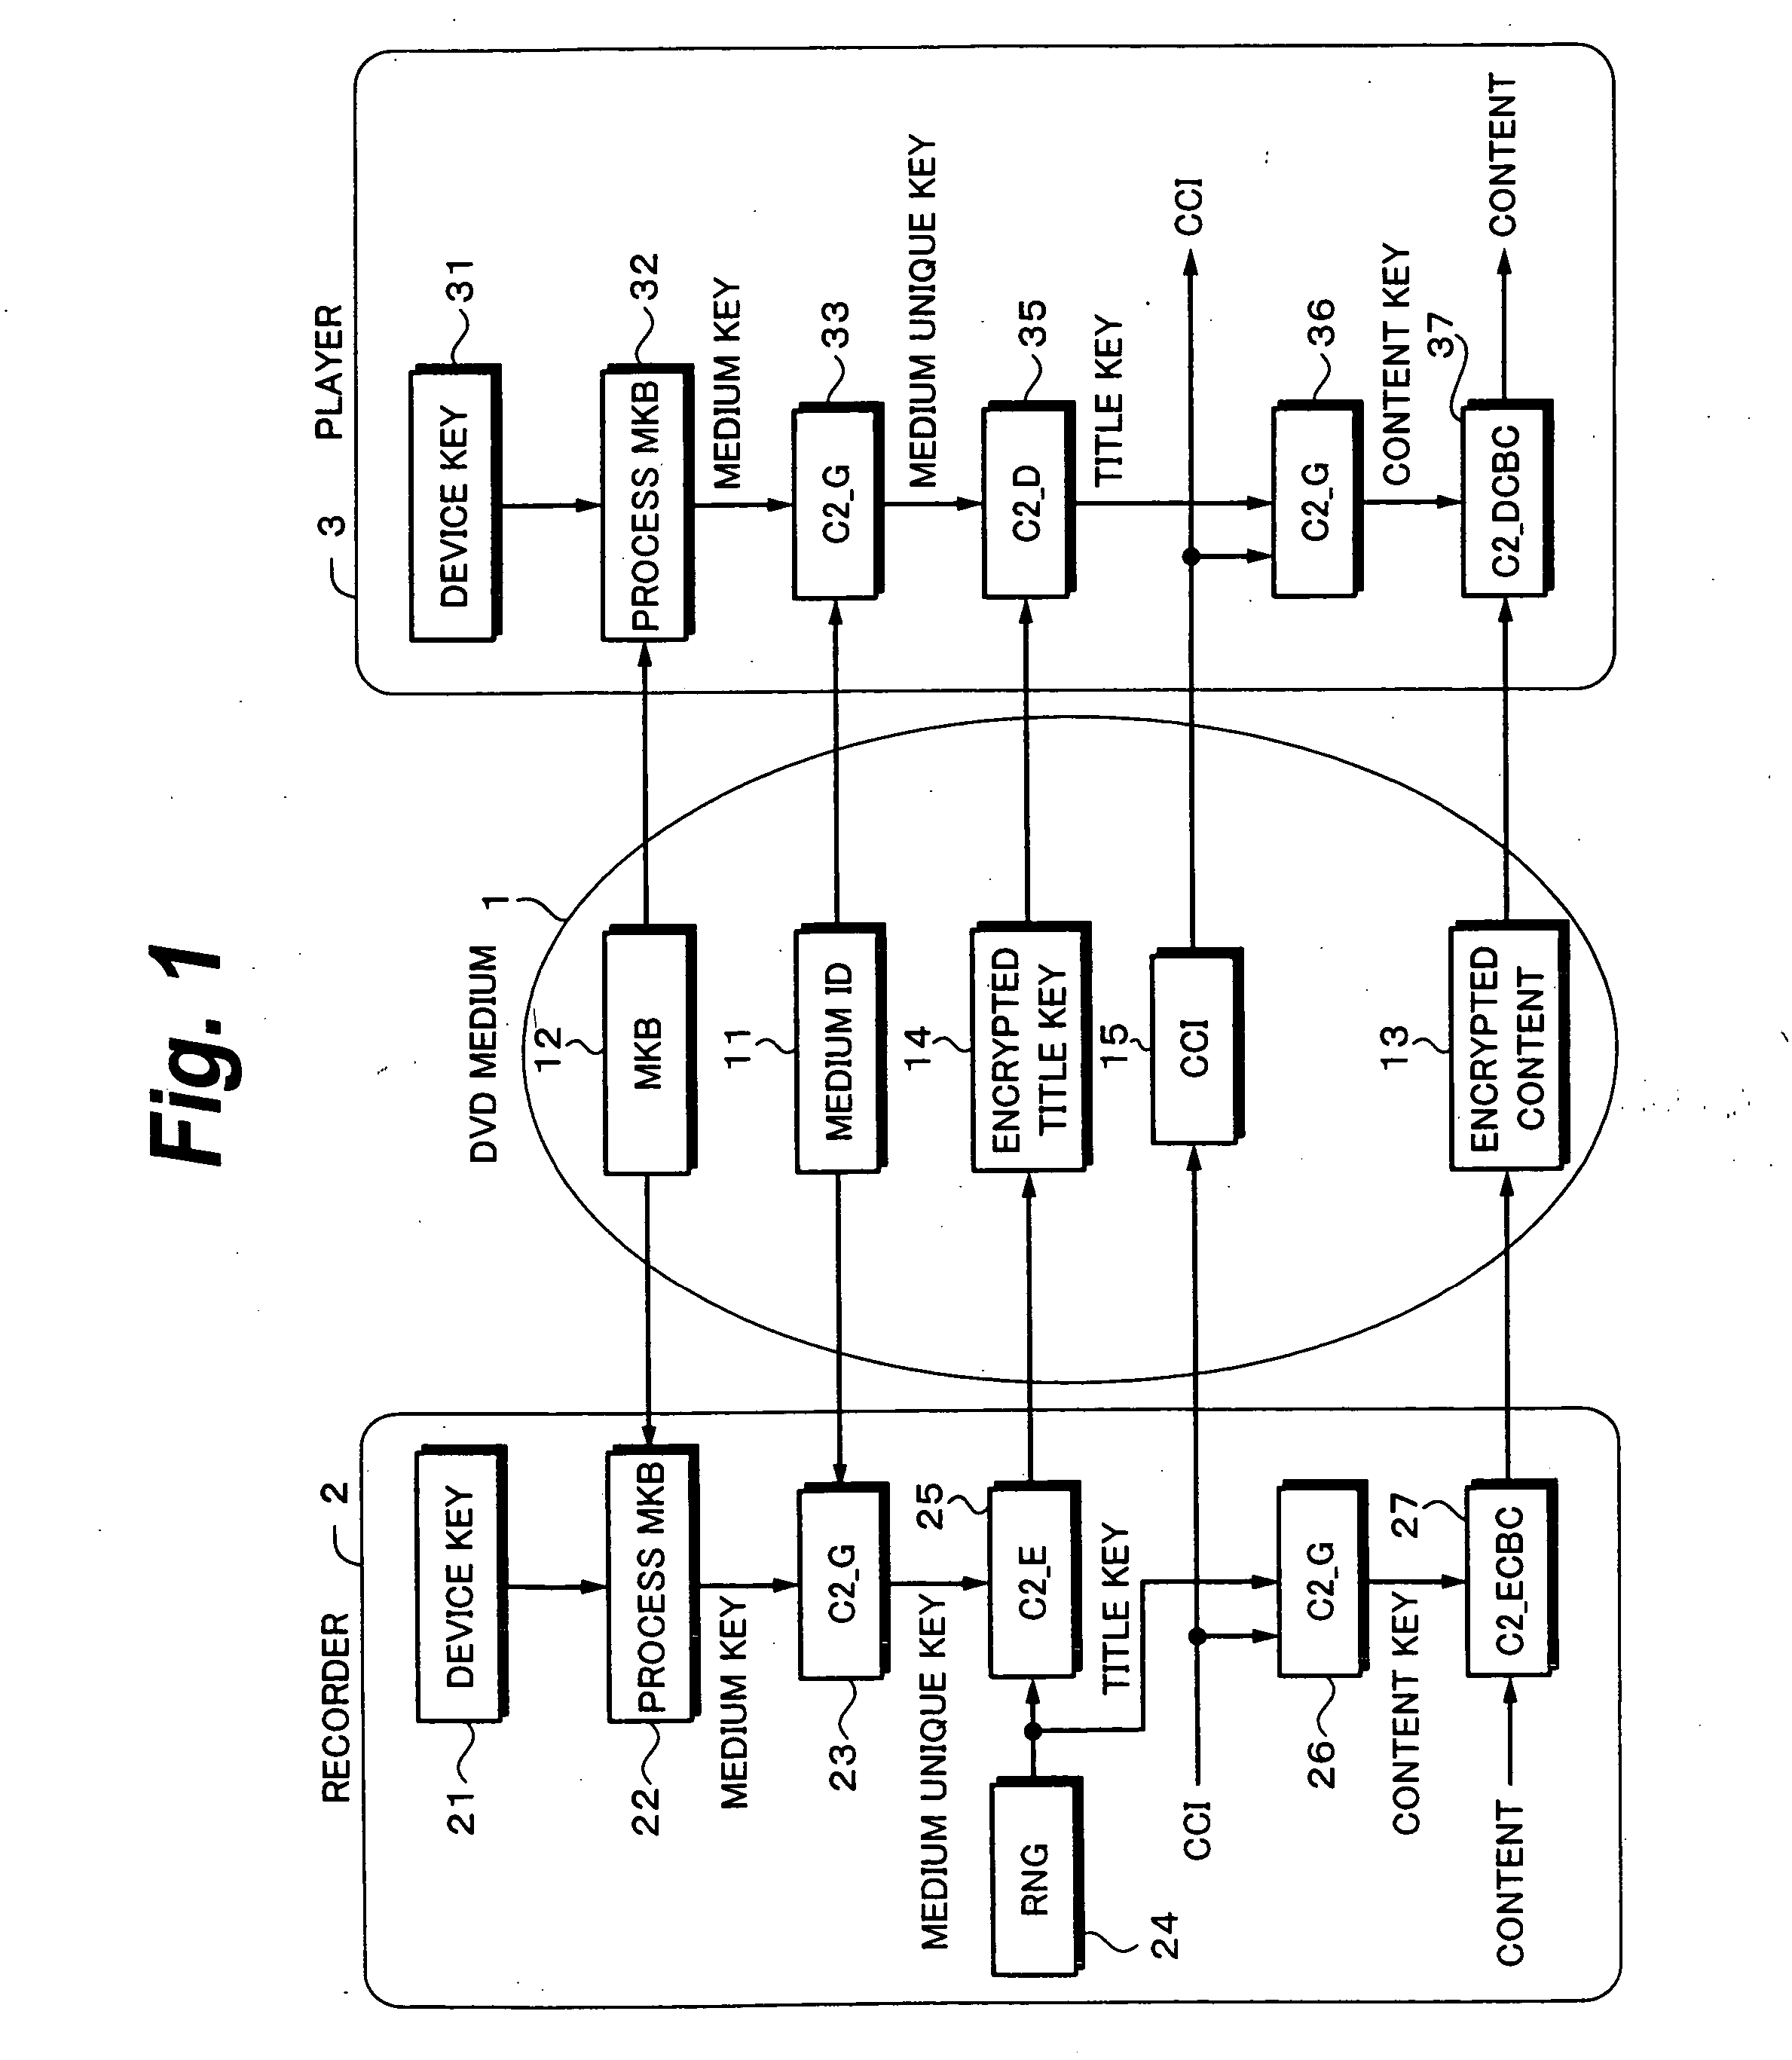 Signal processing system, recording method, program, recording medium, reproduction device and information processing device